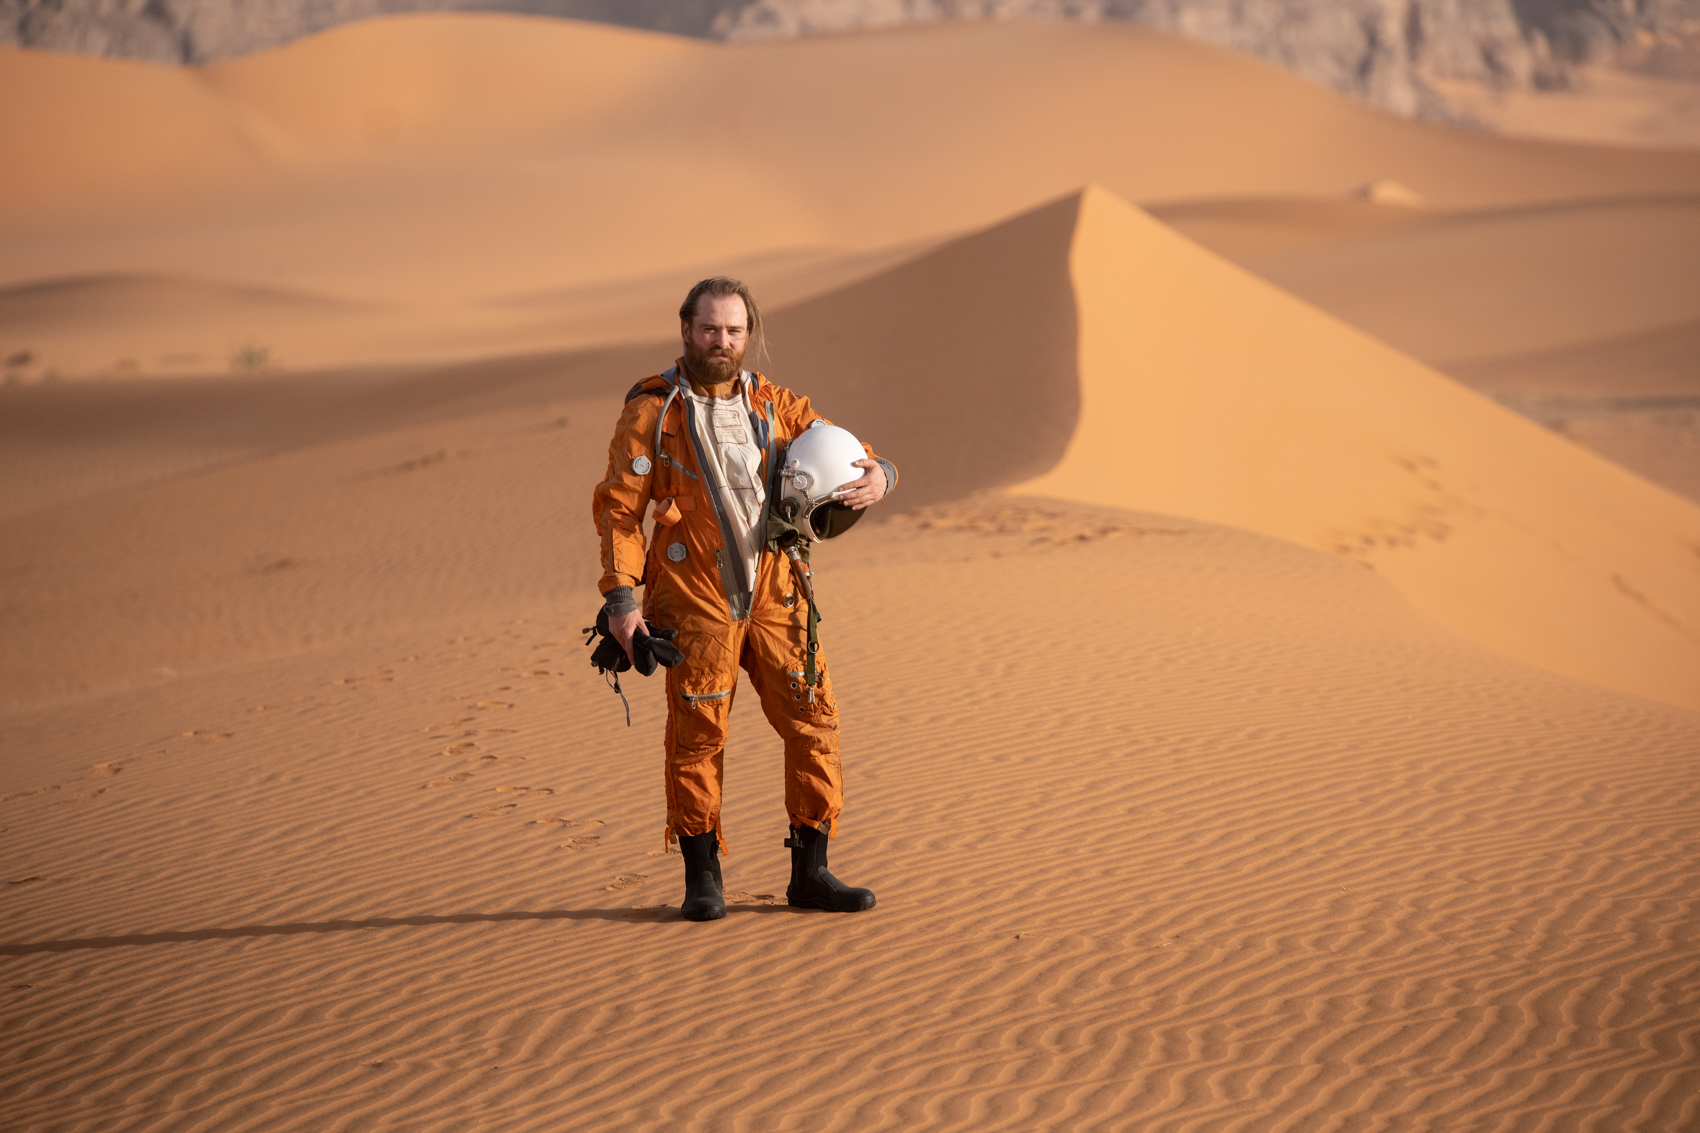 'Astronaut' Niels van de Linde of the Netherlands airs out the space suit in-between shooting in the heat of the Algerian Sahara